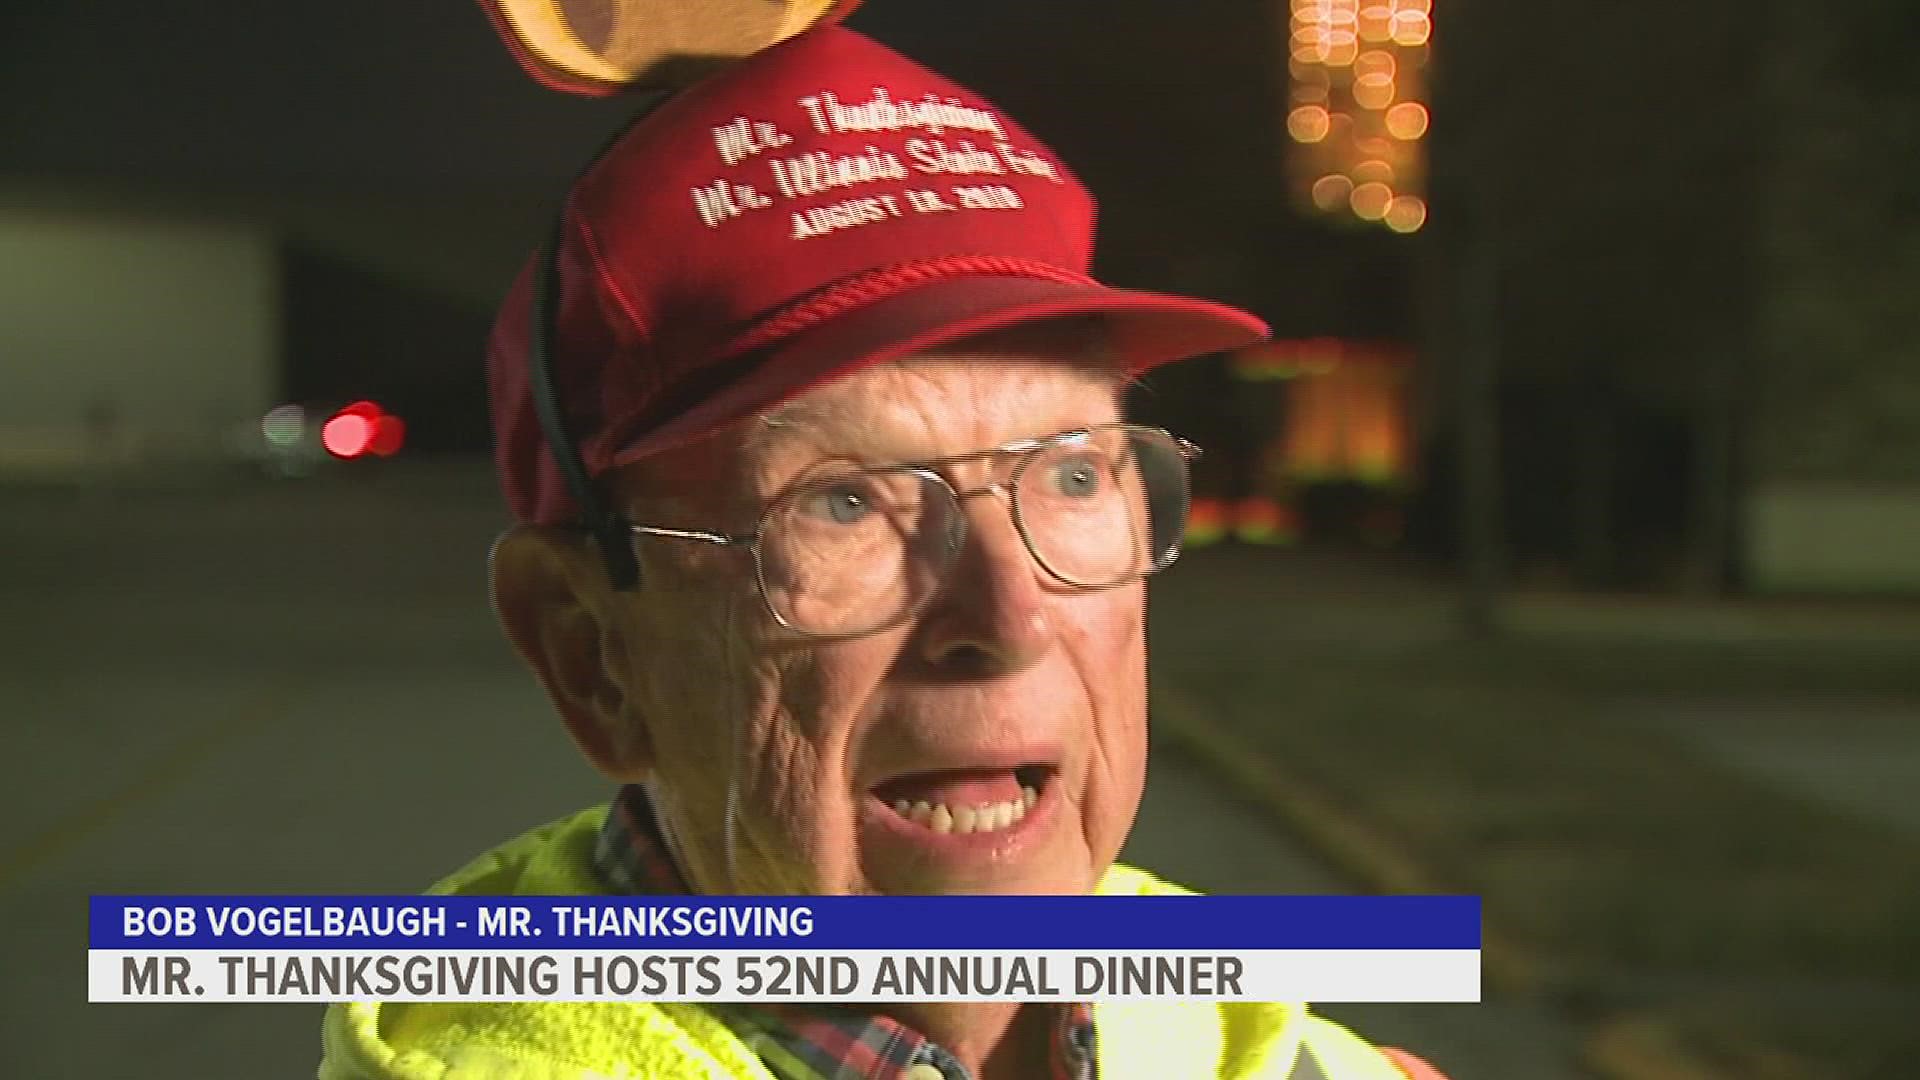 Mr. Thanksgiving continues to give back to the community as he serves thanksgiving dinners